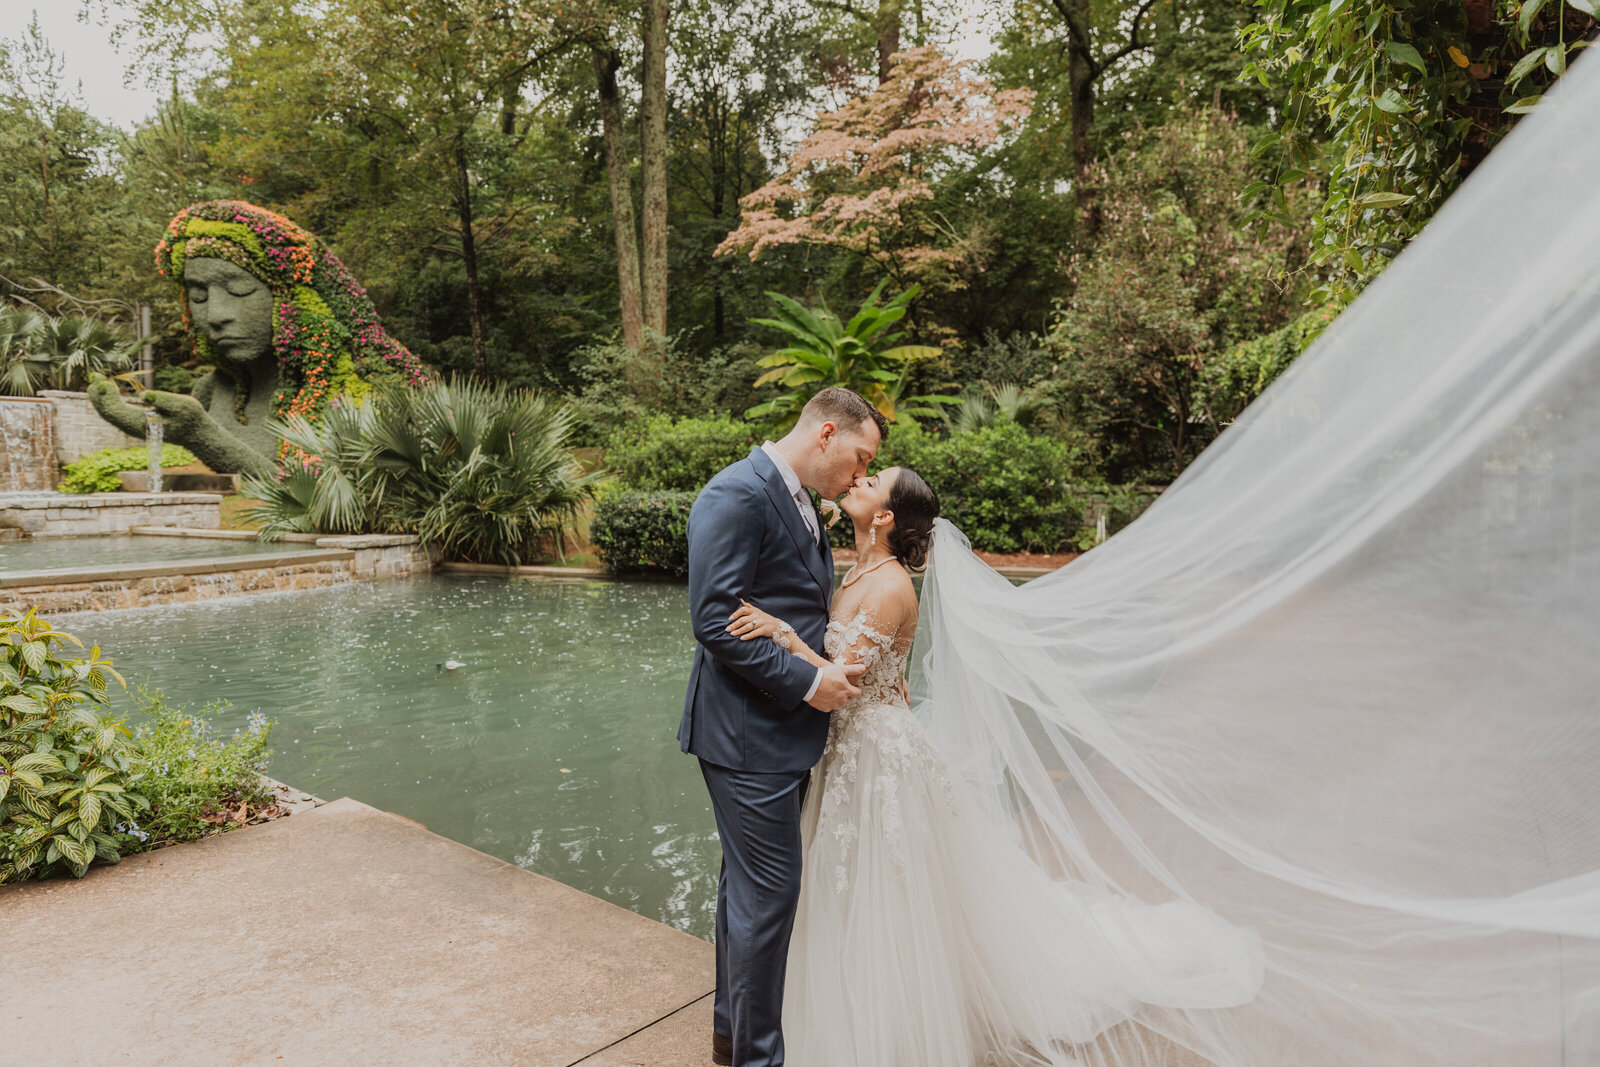 A Floral Fairy Tale of timeless magic. Secret garden romance at the Atlanta Botanical Gardens. Intimate wedding photography with timeless artistry